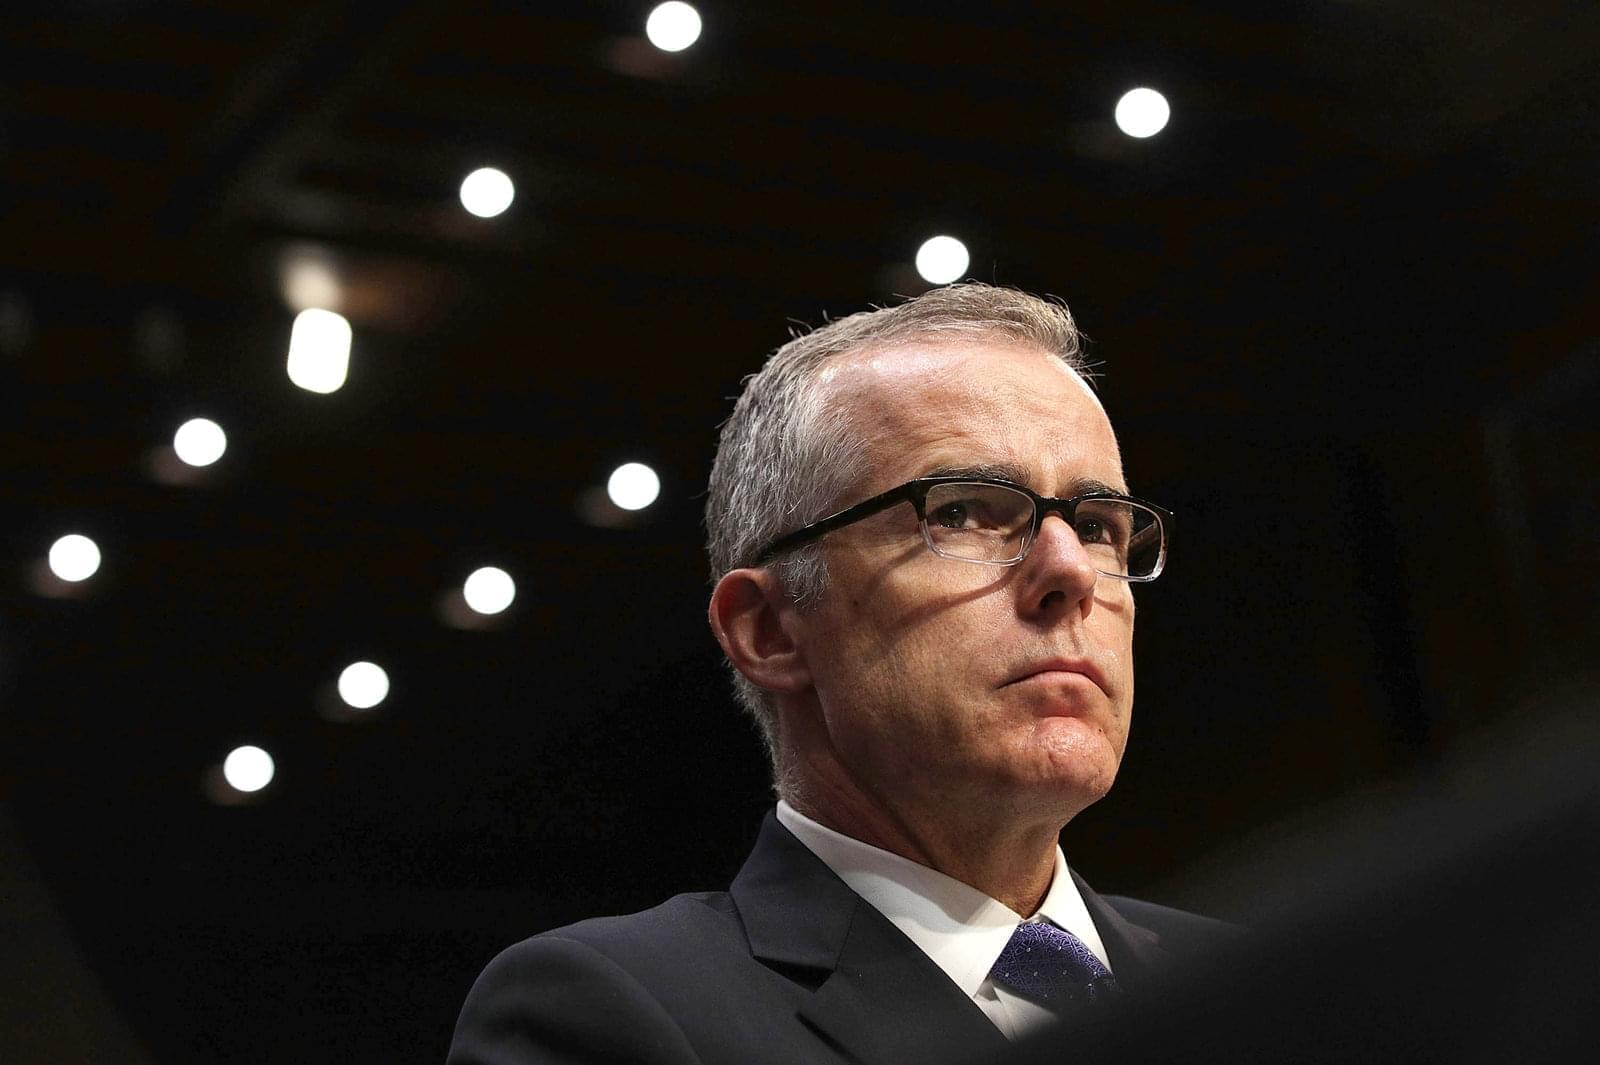 Then-Acting FBI Director Andrew McCabe testified before the Senate Intelligence Committee on Capitol Hill on May 11, 2017, soon after James Comey's abrupt firing by President Trump. 